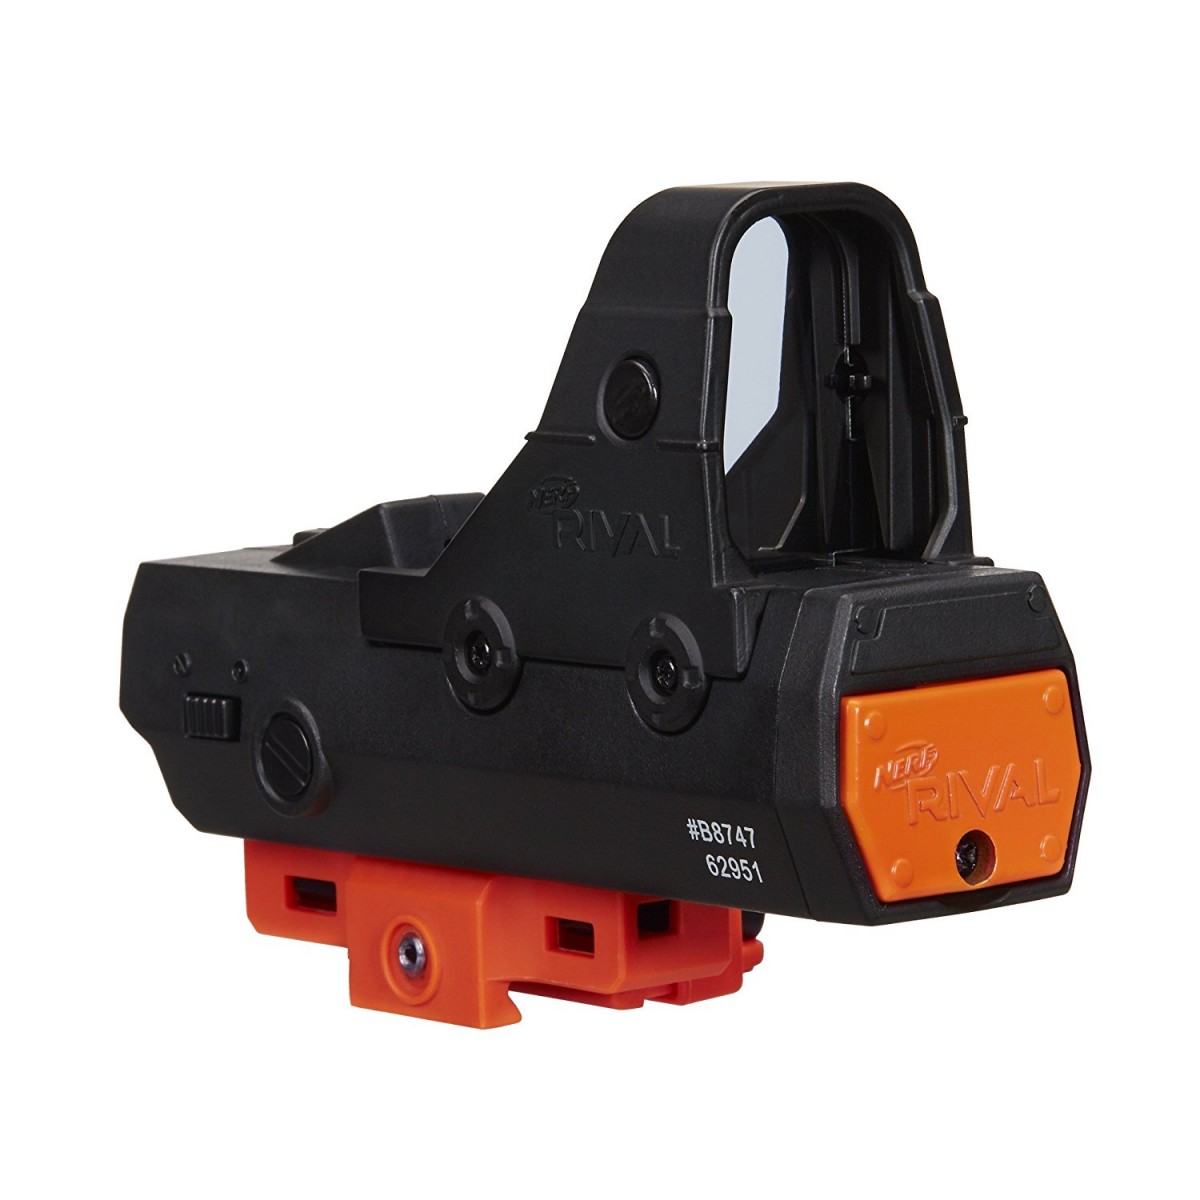 Rival Red Dot Sight